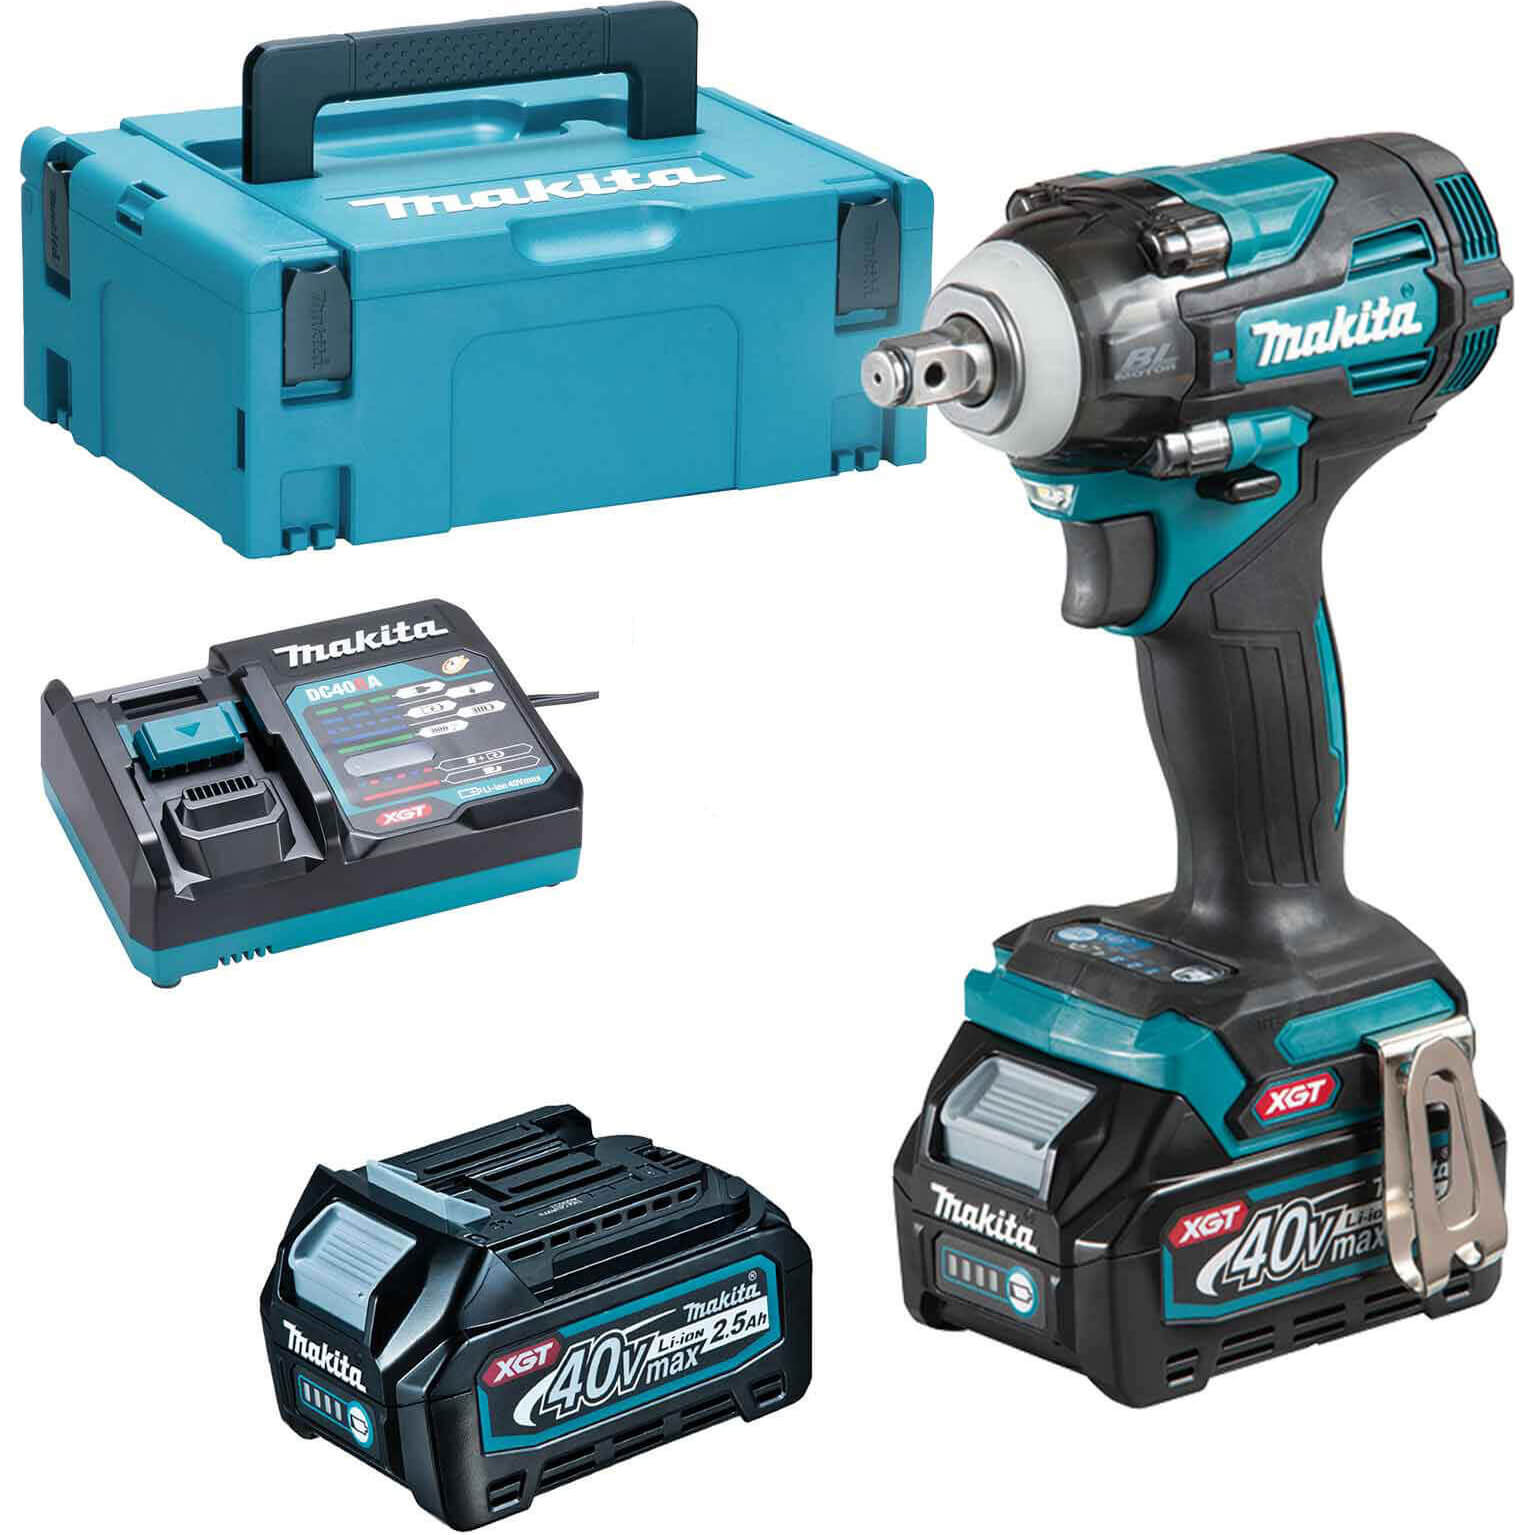 Image of Makita TW004G 40v Max XGT Cordless Brushless 1/2" Drive Impact Wrench 2 x 2.5ah Li-ion Charger Case